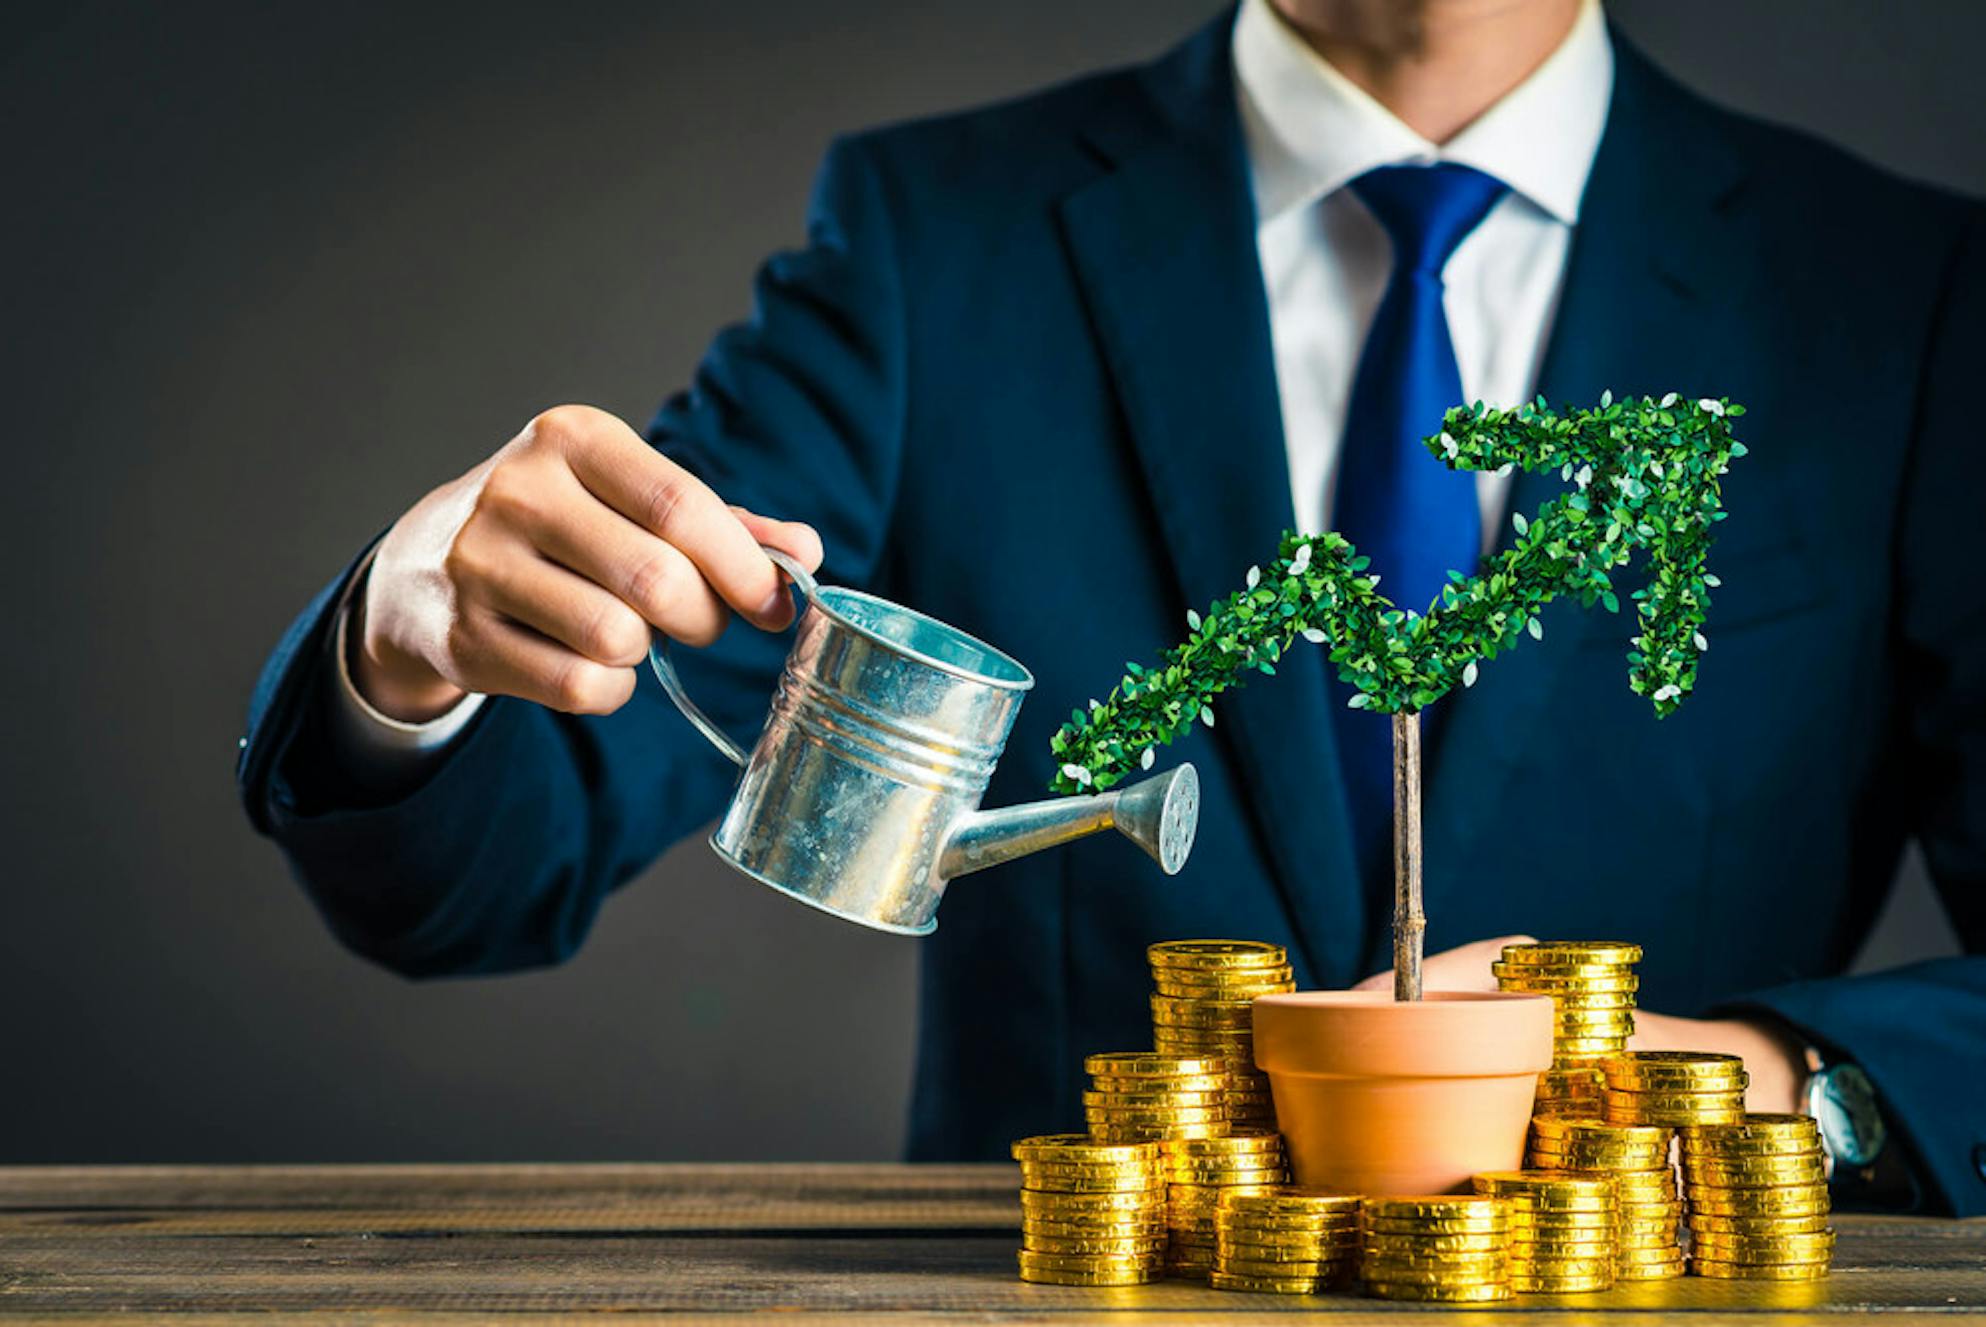 Tree with coins demonstrate that investing is part of the wealth mindset